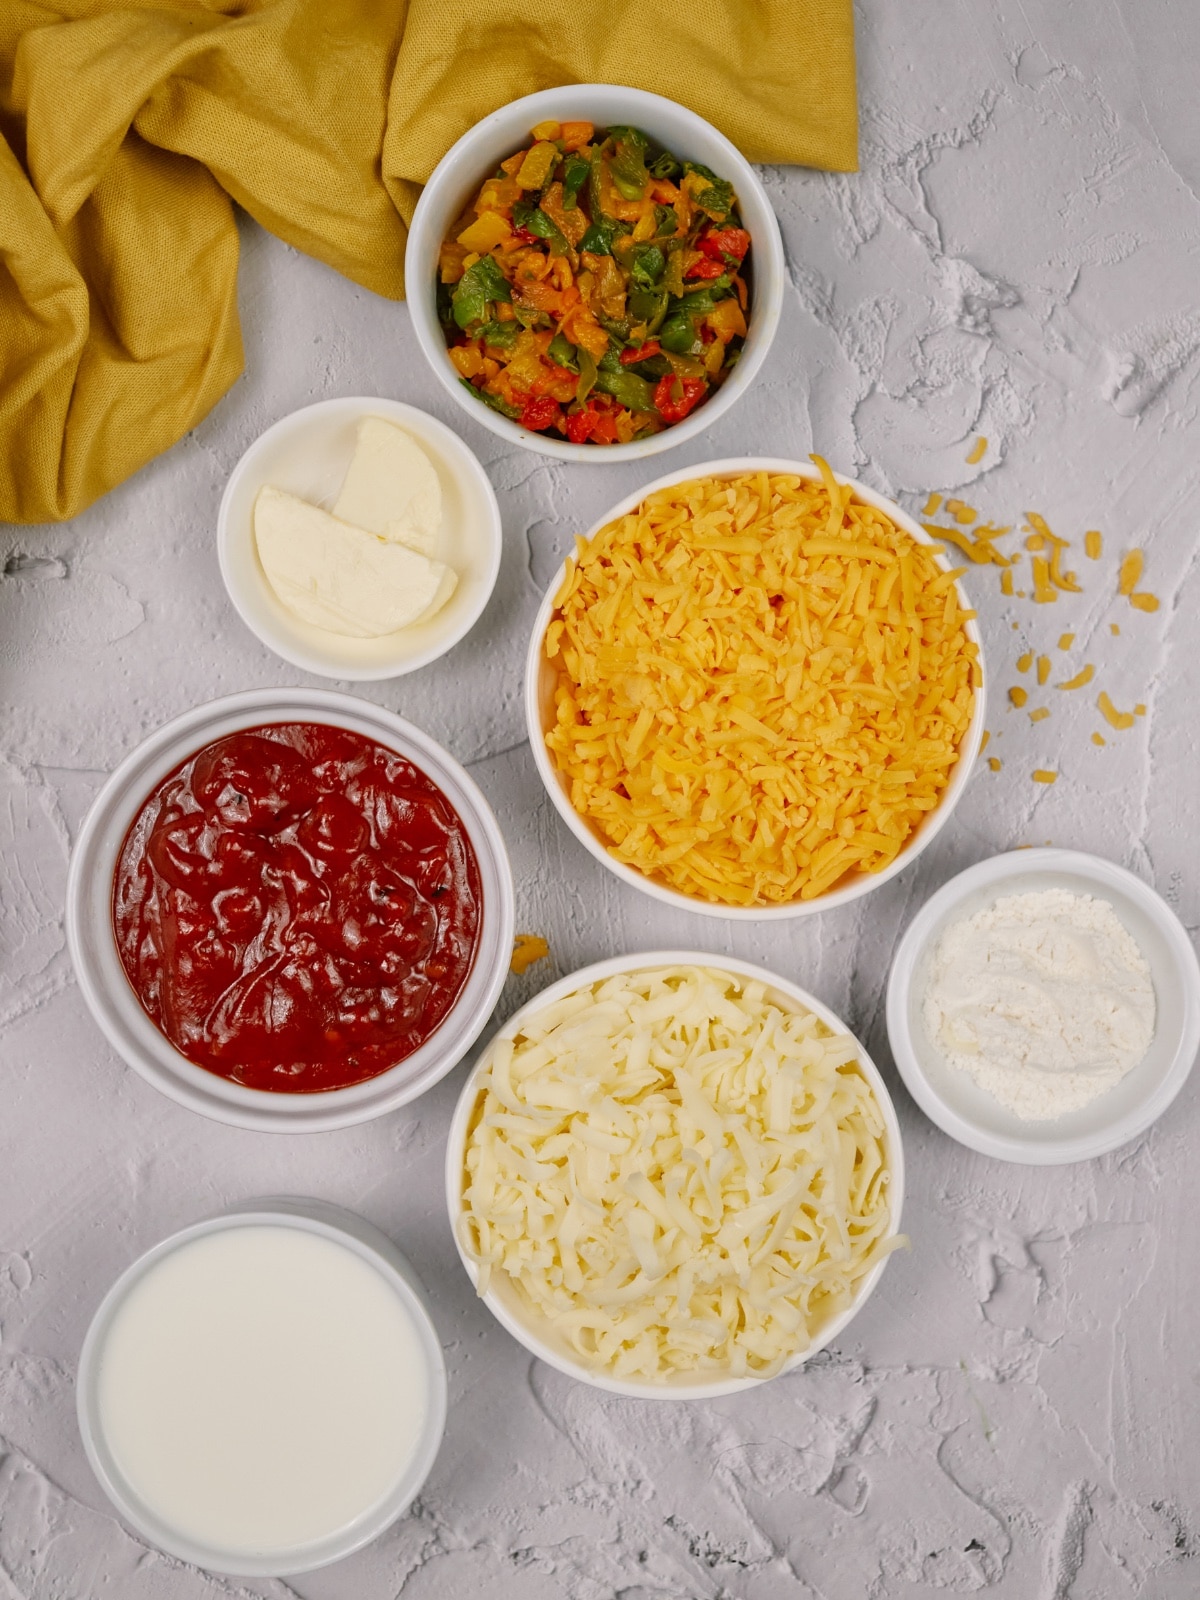 ingredients of chili relleno casserole in small white bowls on a white surface